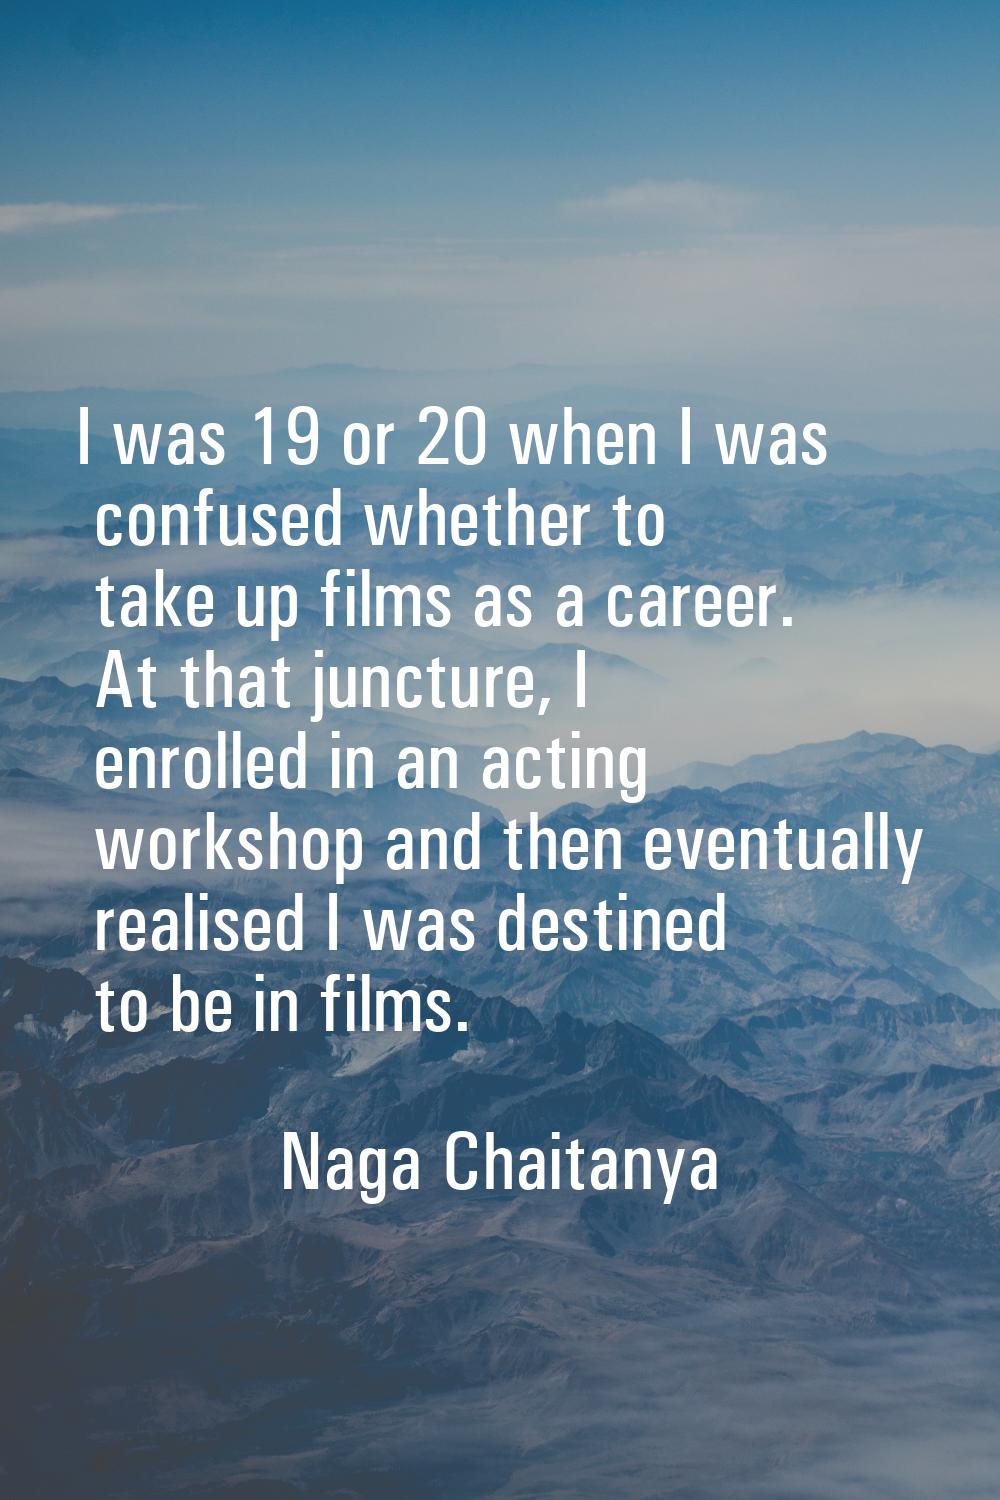 I was 19 or 20 when I was confused whether to take up films as a career. At that juncture, I enroll